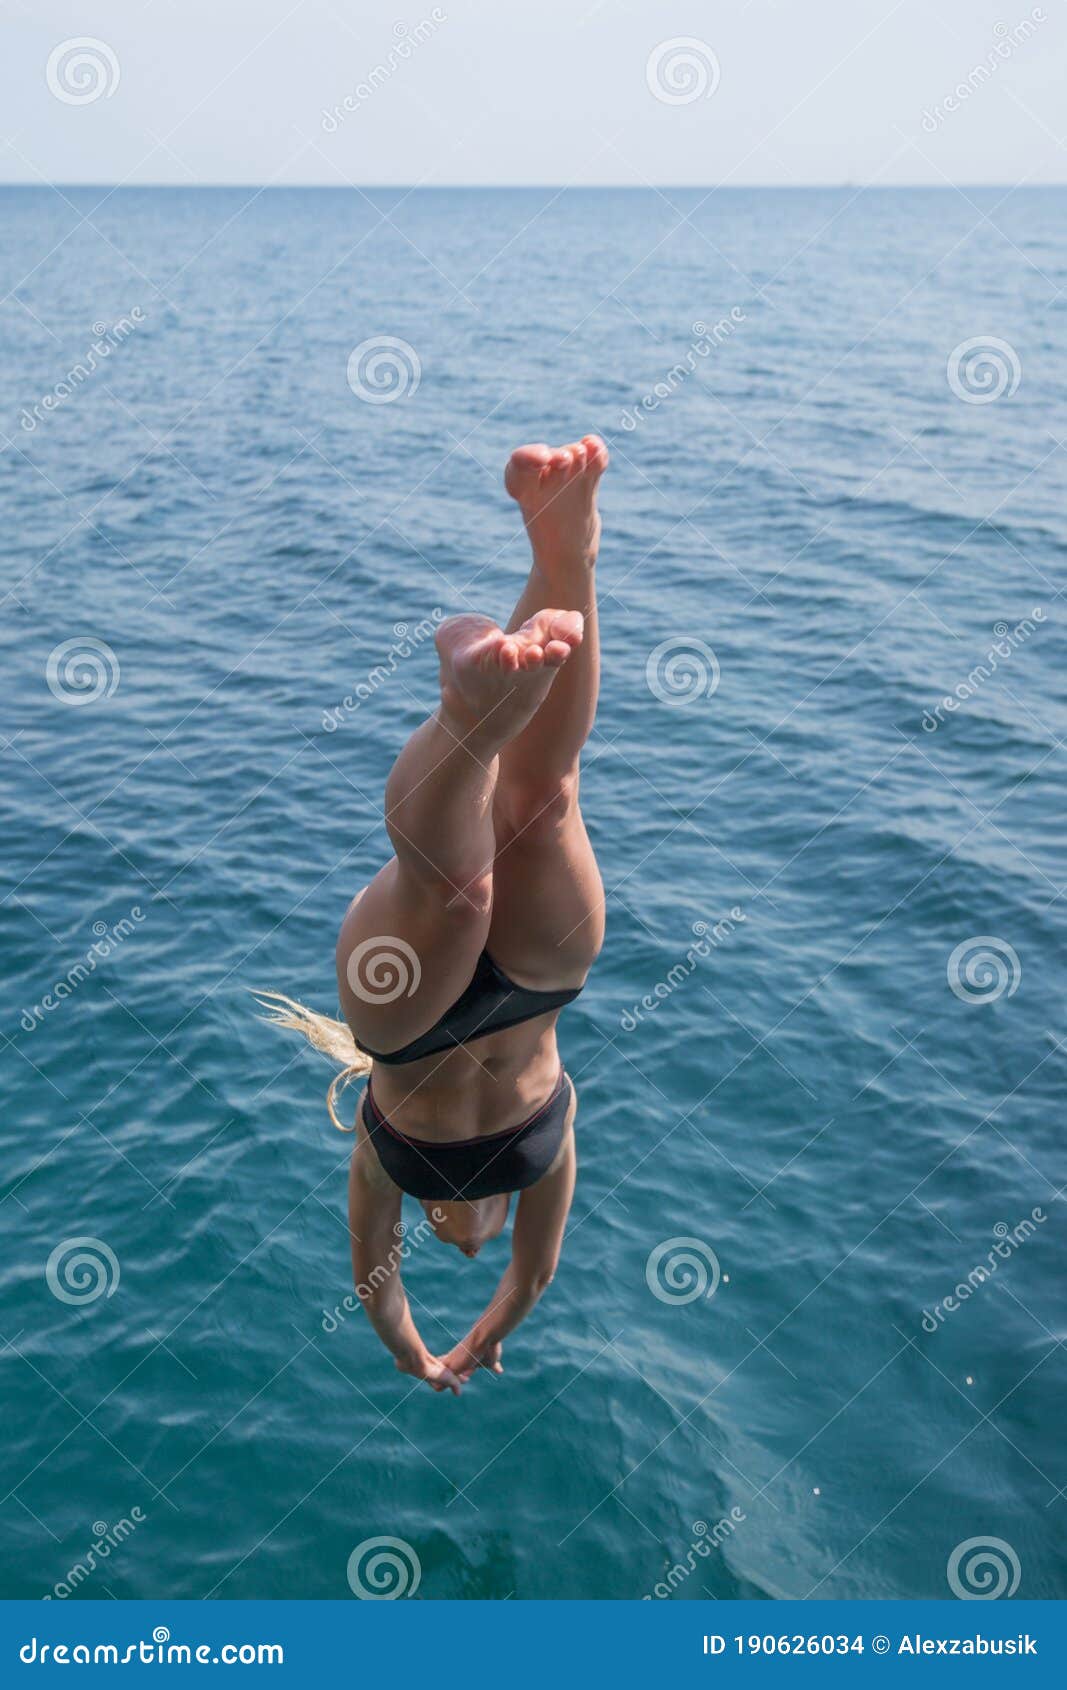 girl plunging into deep sea water